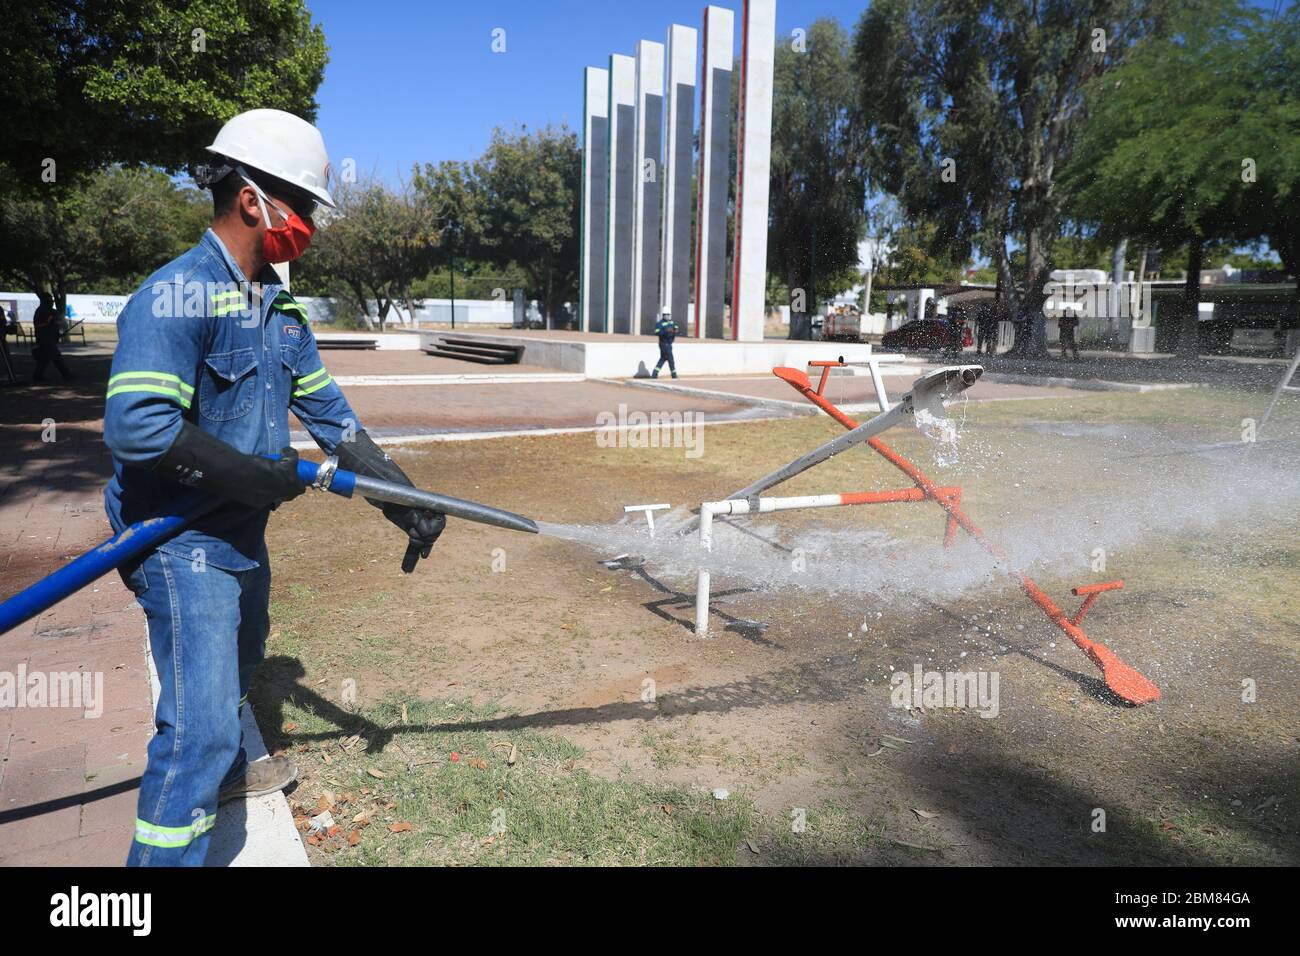 City council workers carry out sanitation work due to the Covid 19  pandemic, using pressurized liquids to clean the Niños Héroes public plaza.  They play games for children, trees, a statue and